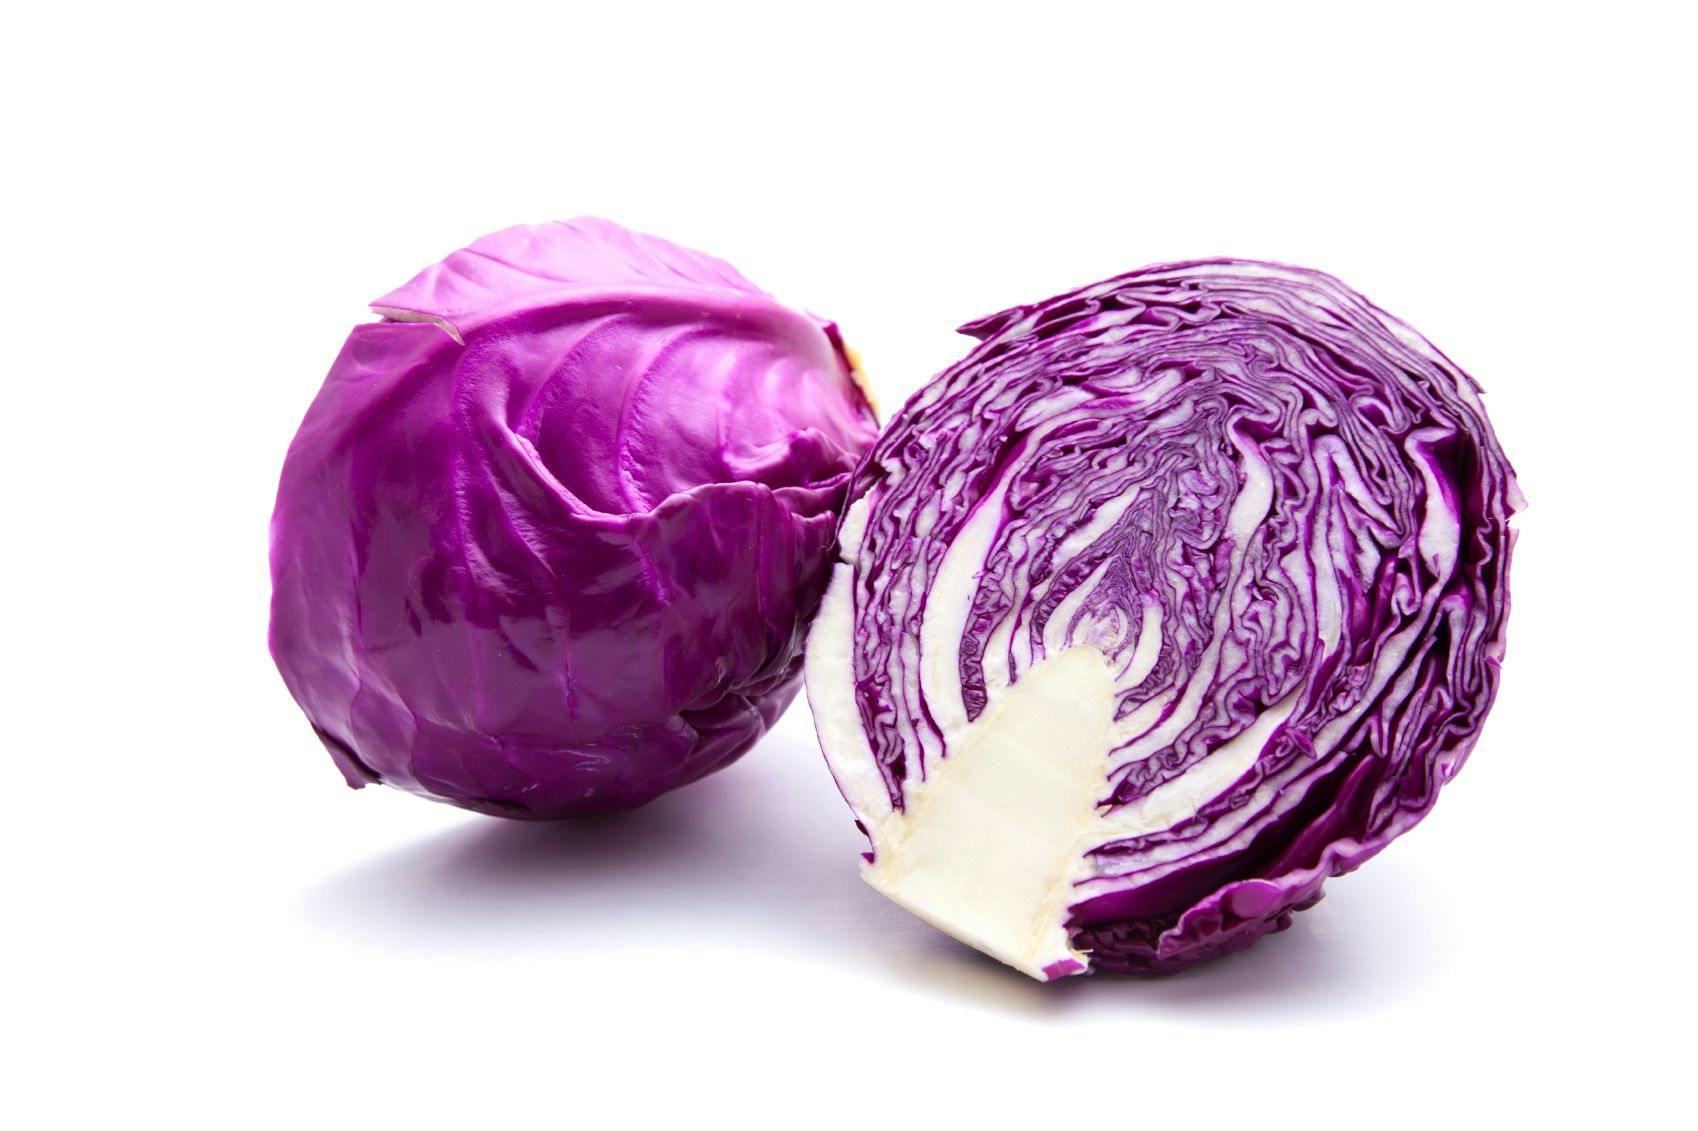 Fun Fact: Red Cabbage